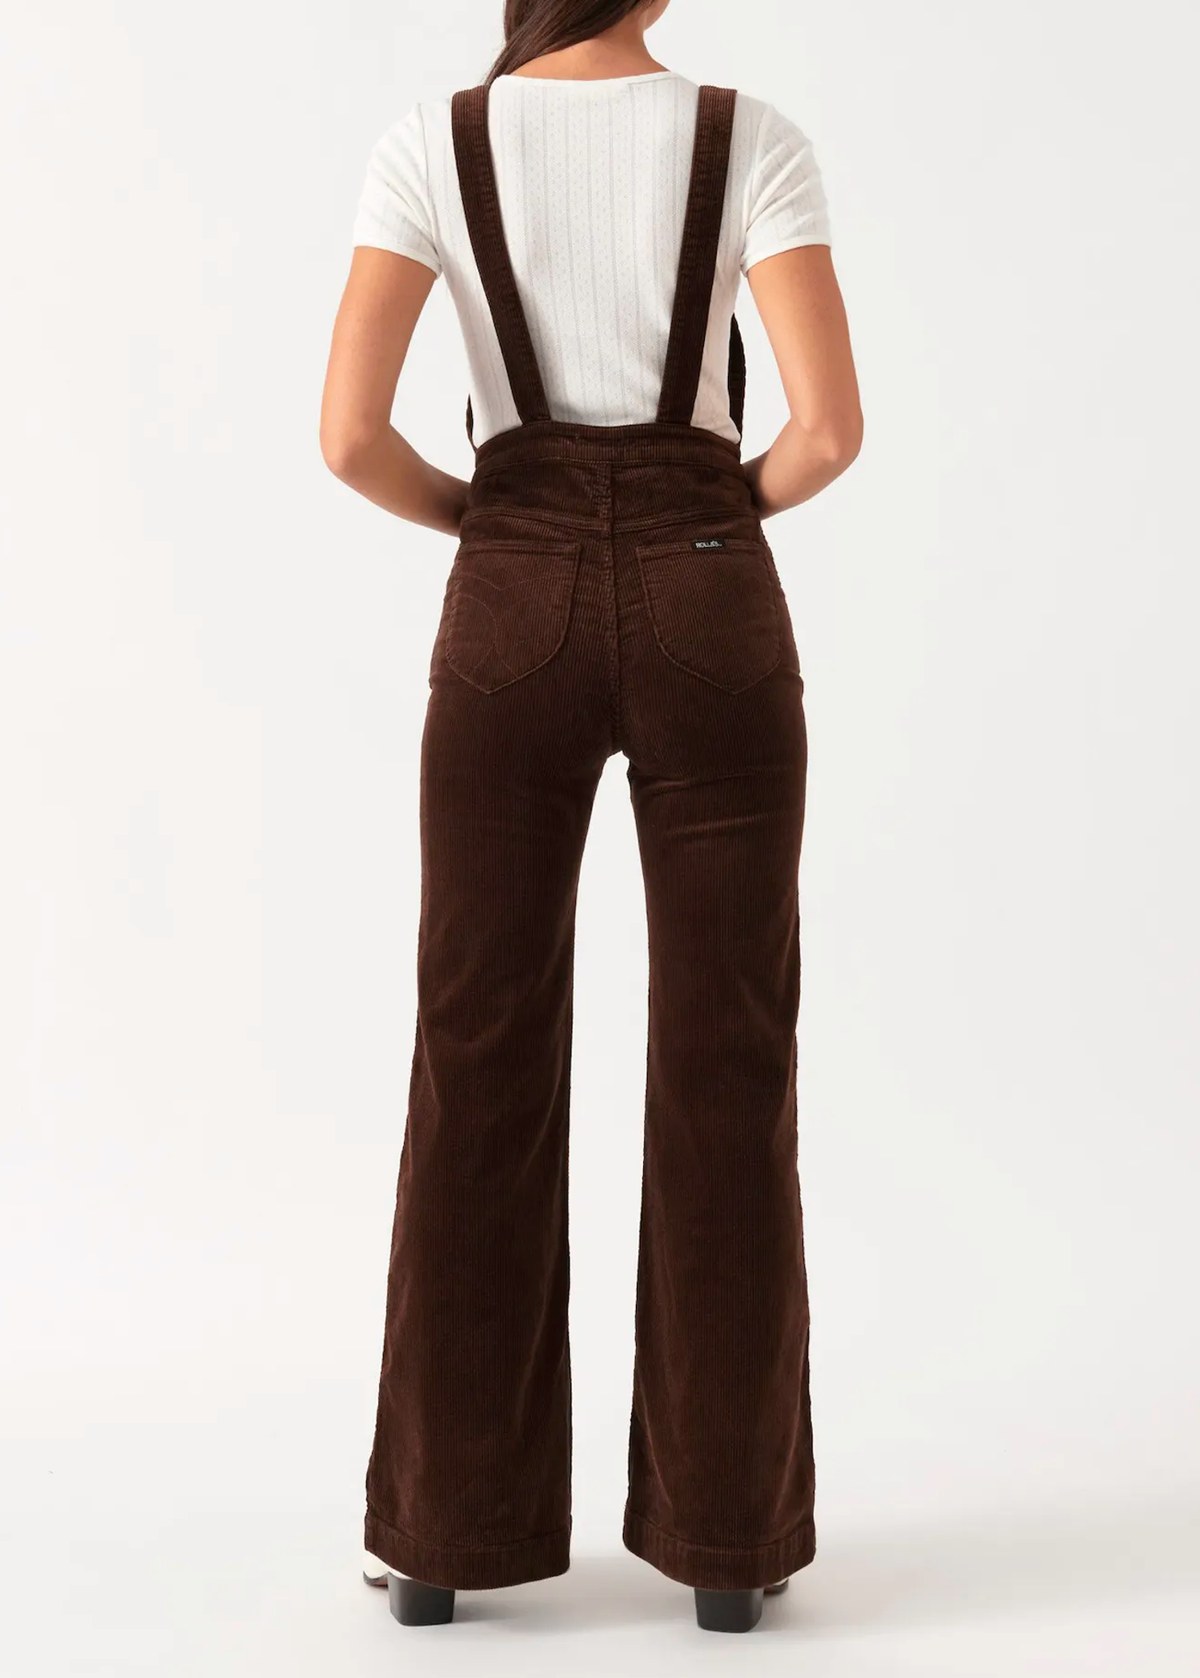 70s inspired brown stretch corduroy zip front Eastcoast Overall Jumpsuit Flares by Rolla's Jeans